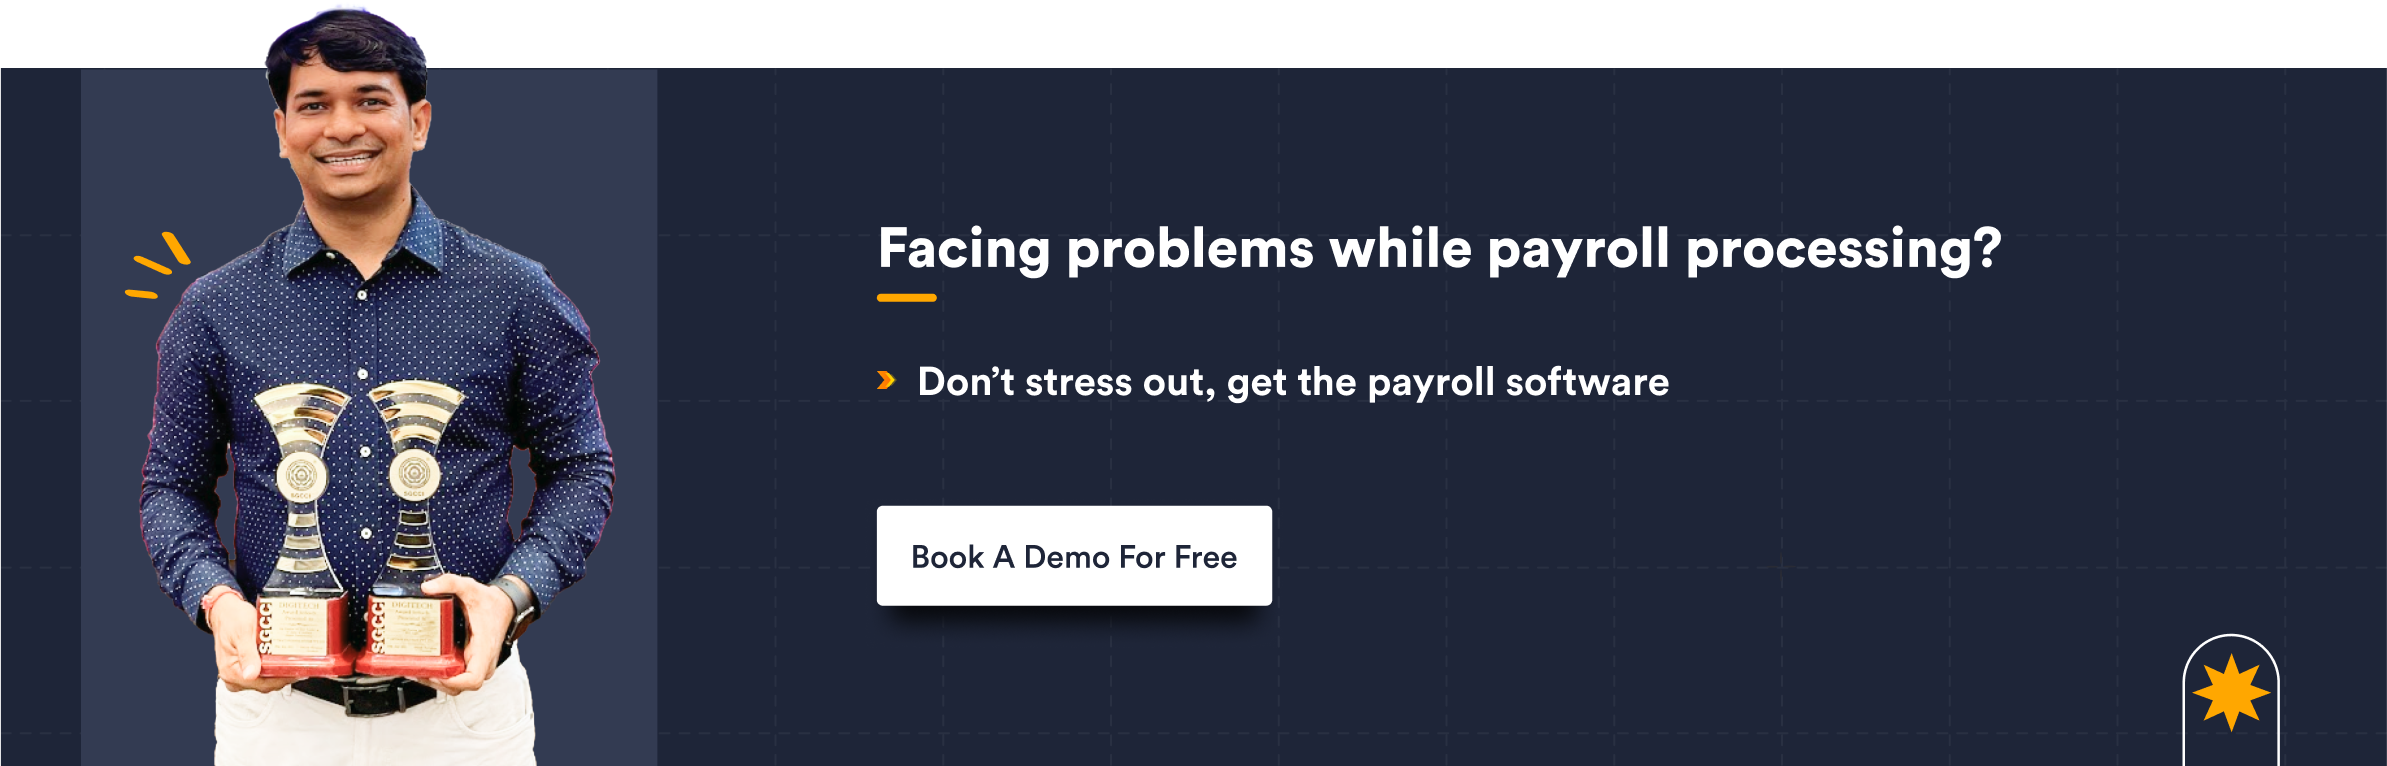 Facing problems while payroll processing